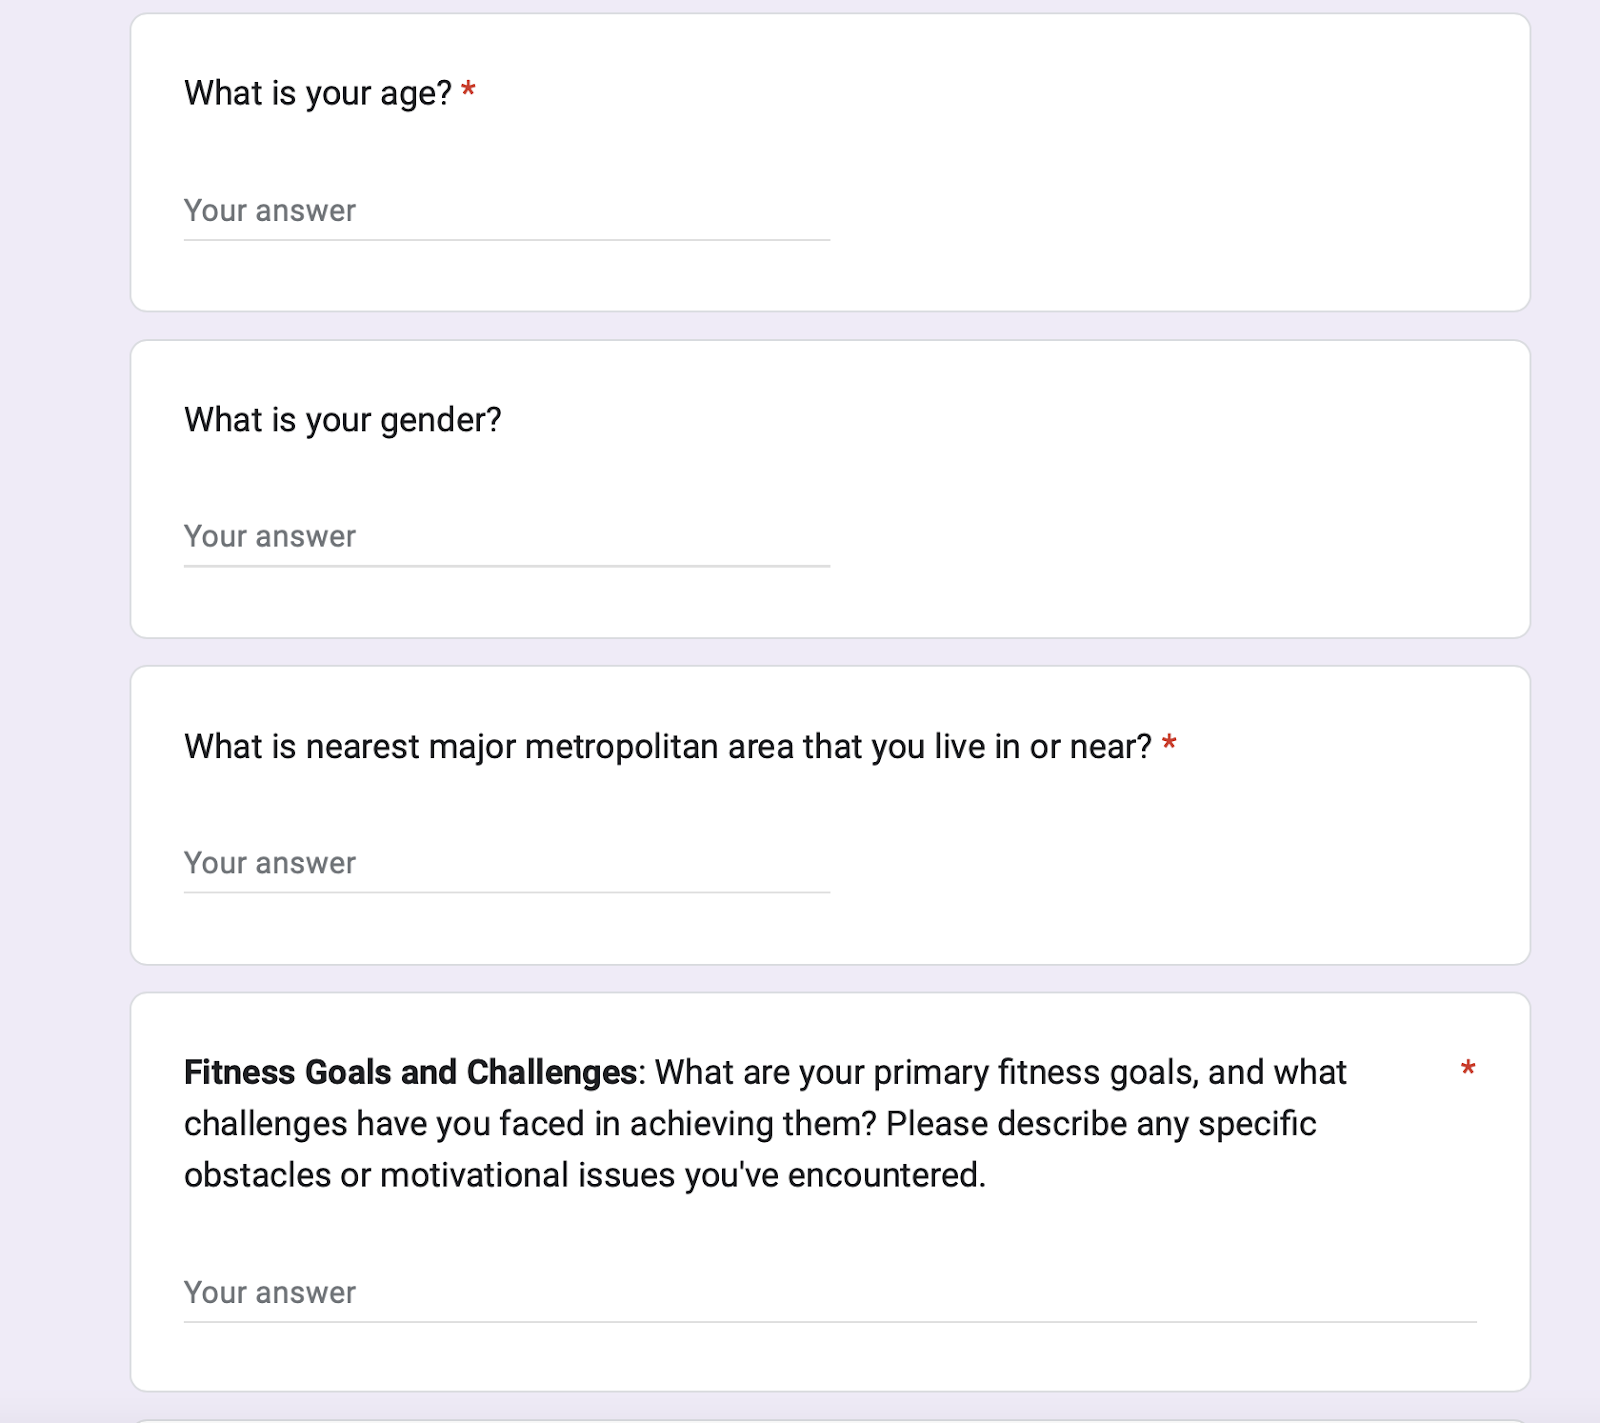 use a Google form to conduct research on your user base